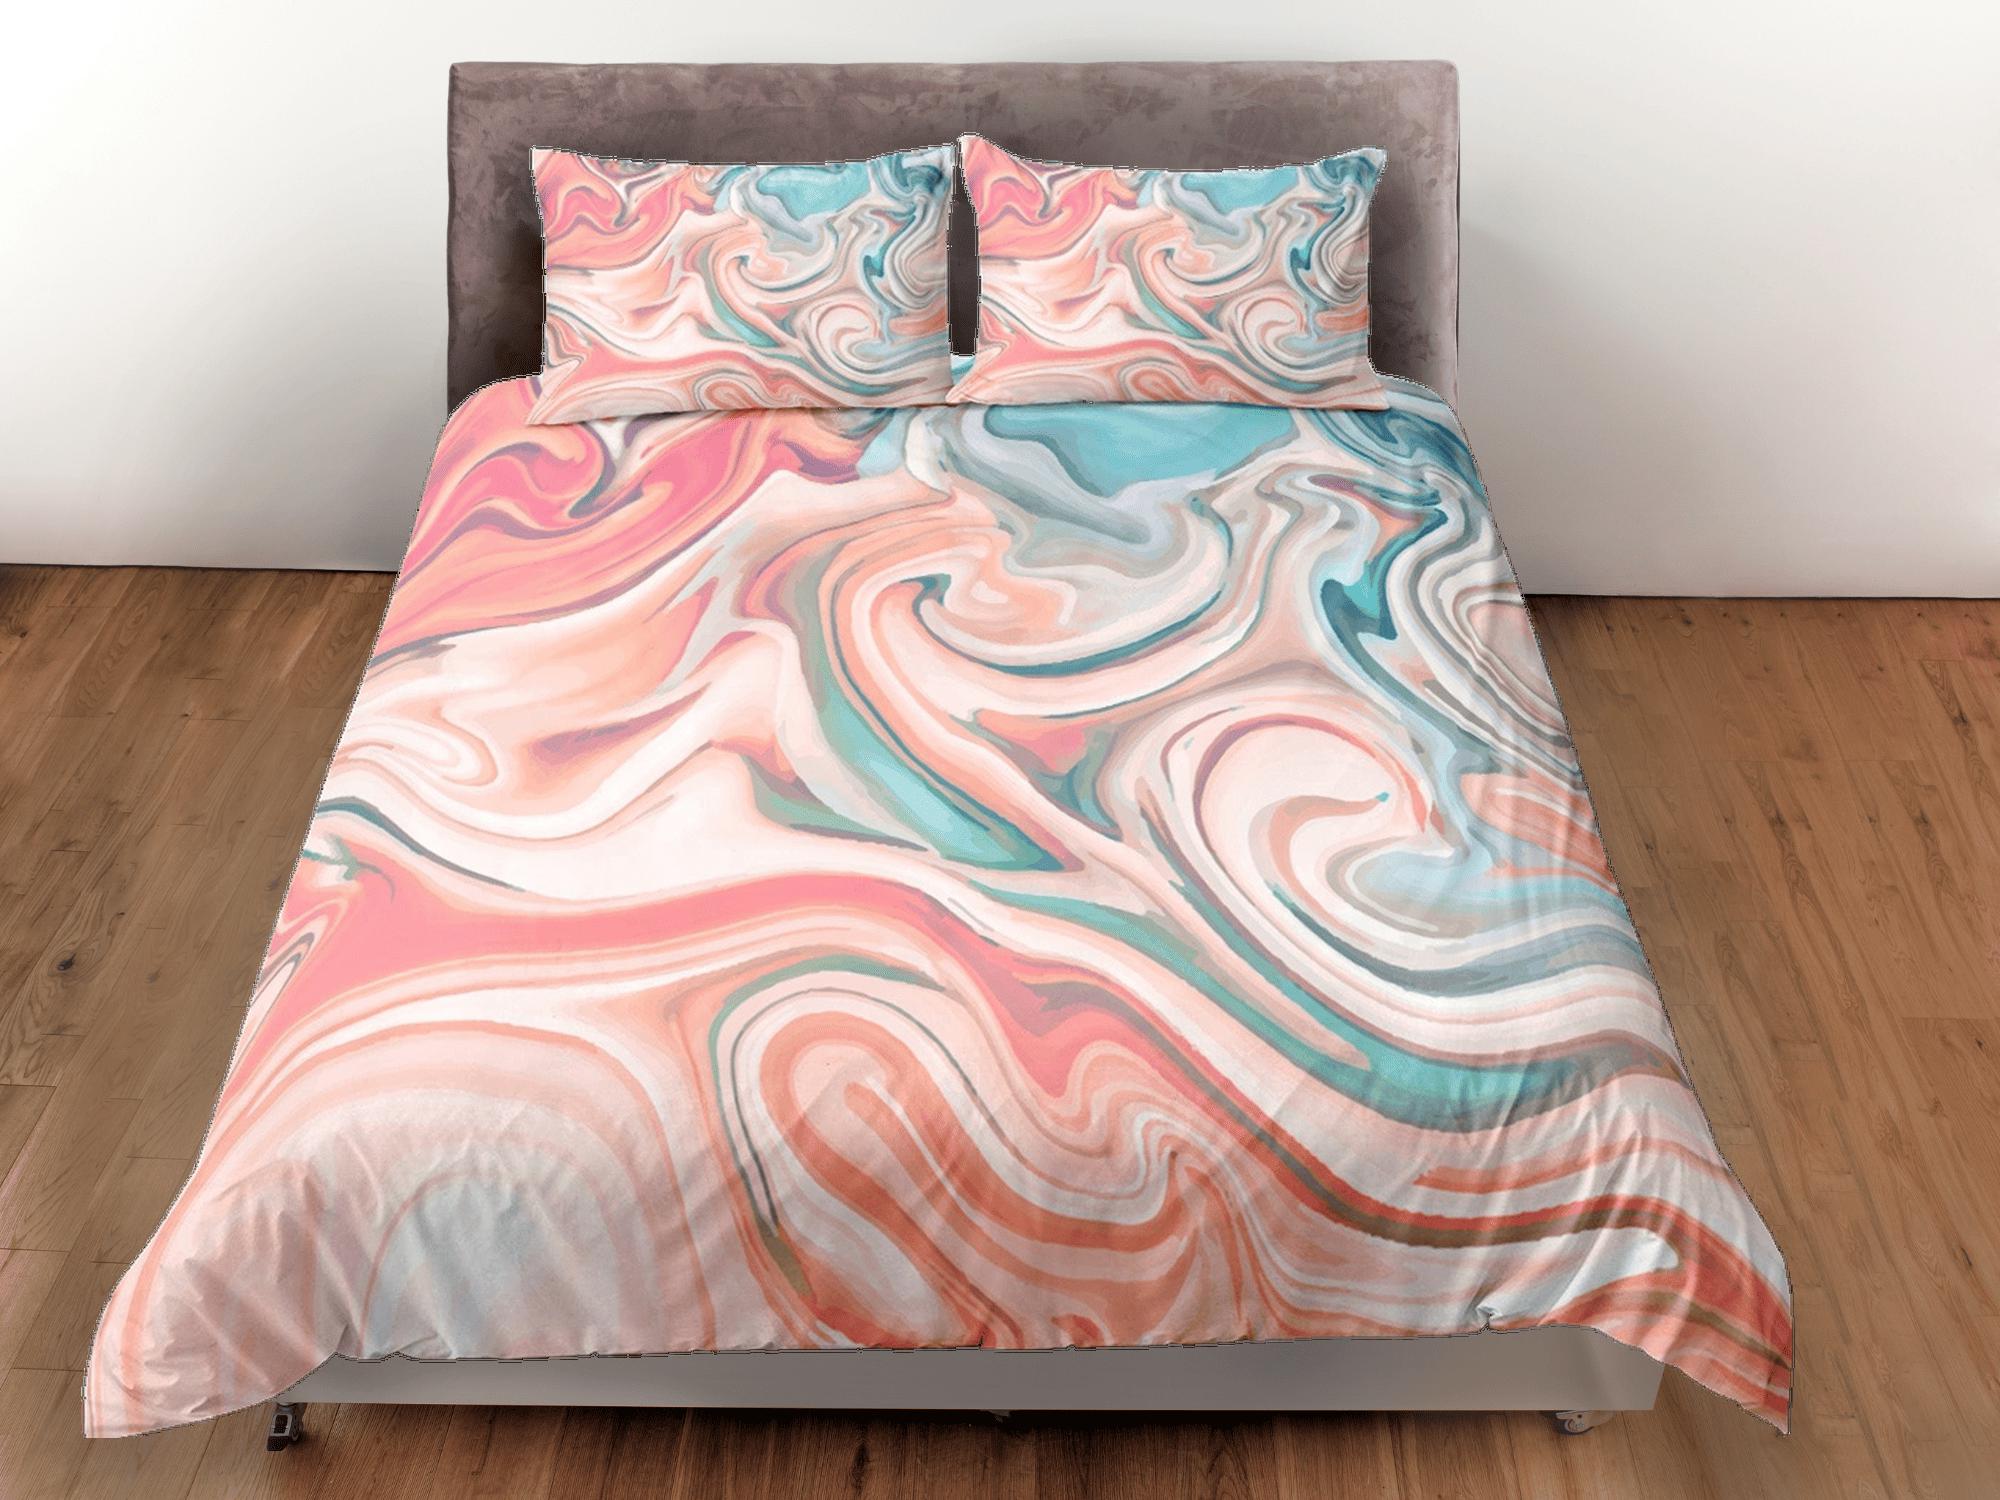 daintyduvet Peach pink contemporary bedroom set aesthetic duvet cover, marble abstract art room decor boho chic bedding set full king queen